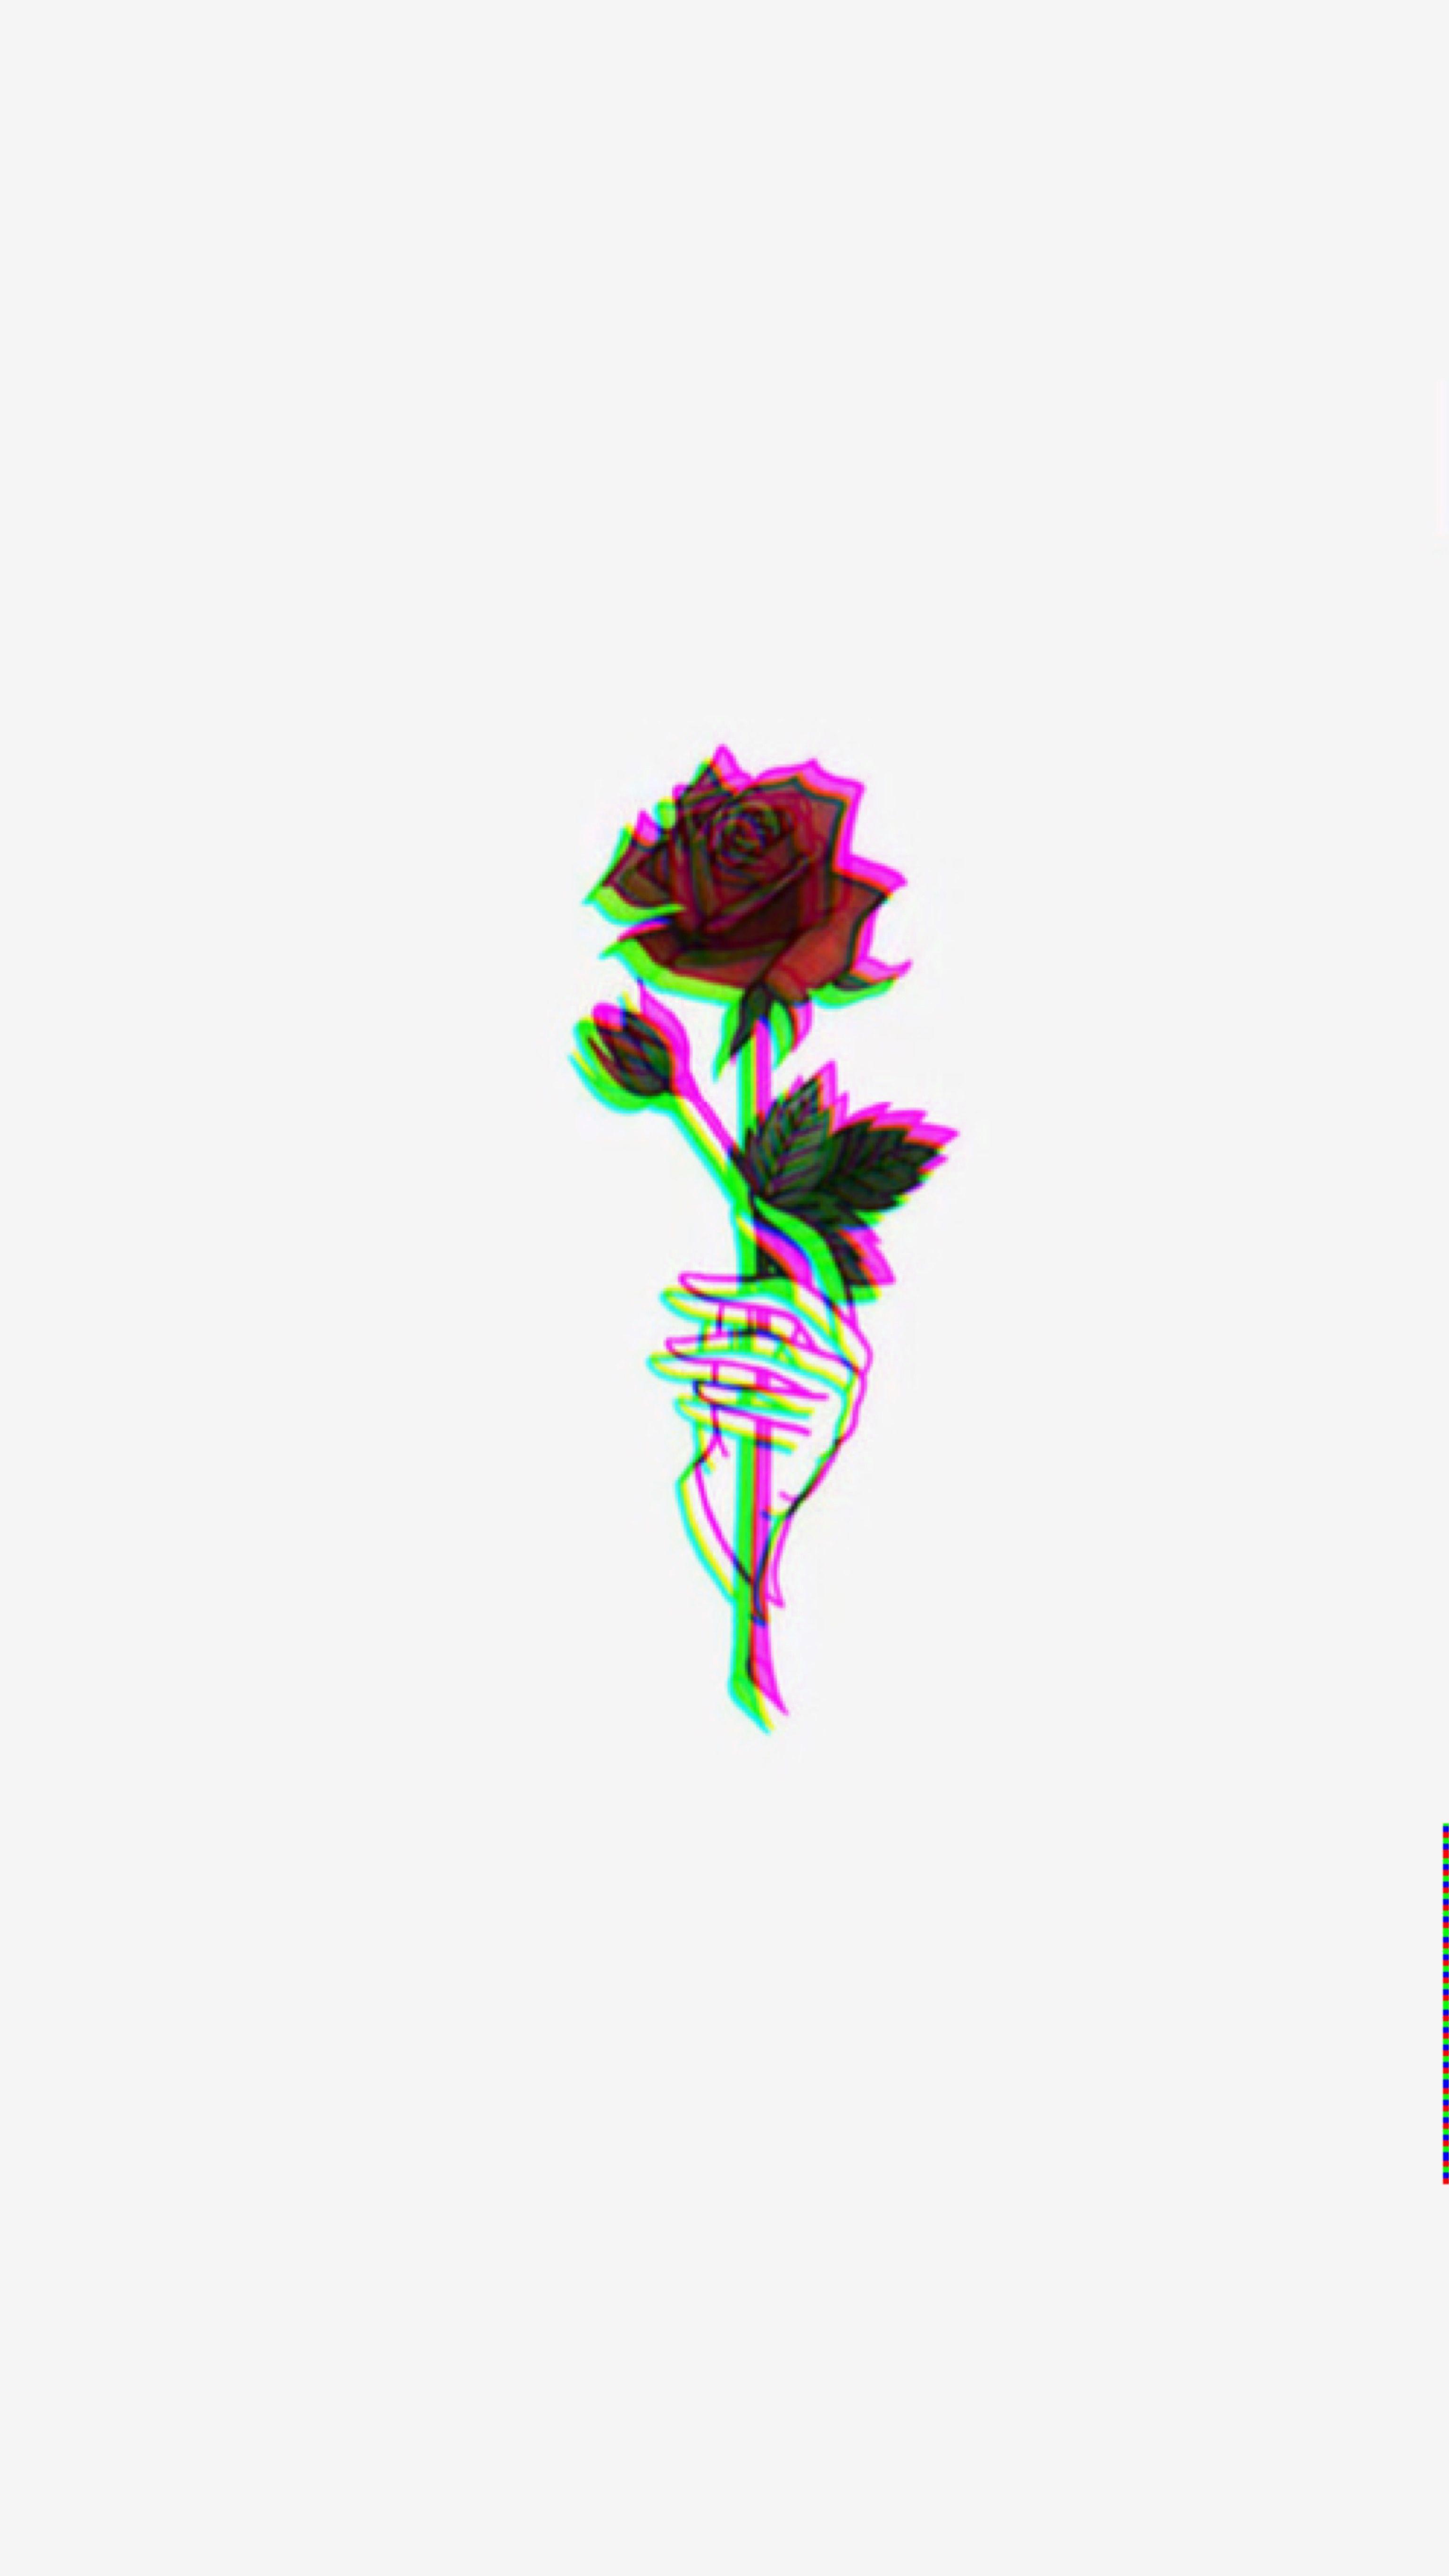 Iphone Aesthetic Roses Wallpapers Top Free Iphone Aesthetic Roses Backgrounds Wallpaperaccess